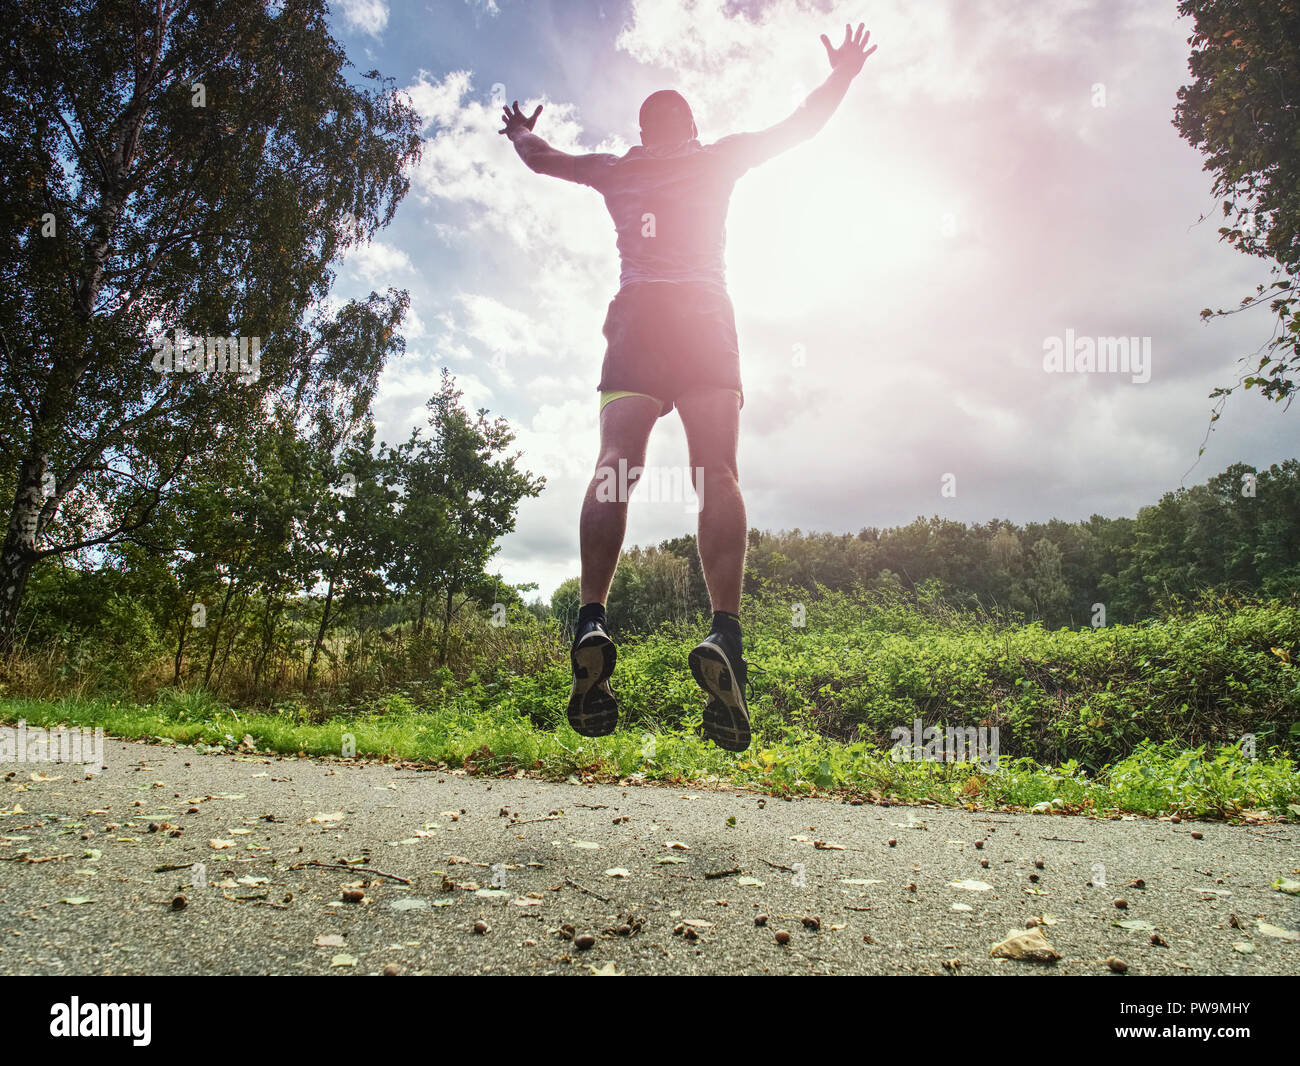 Jogging tall sports man in trees shadows with sun light behind him while  wearing black yellow shorts and blue jogging attire Stock Photo - Alamy